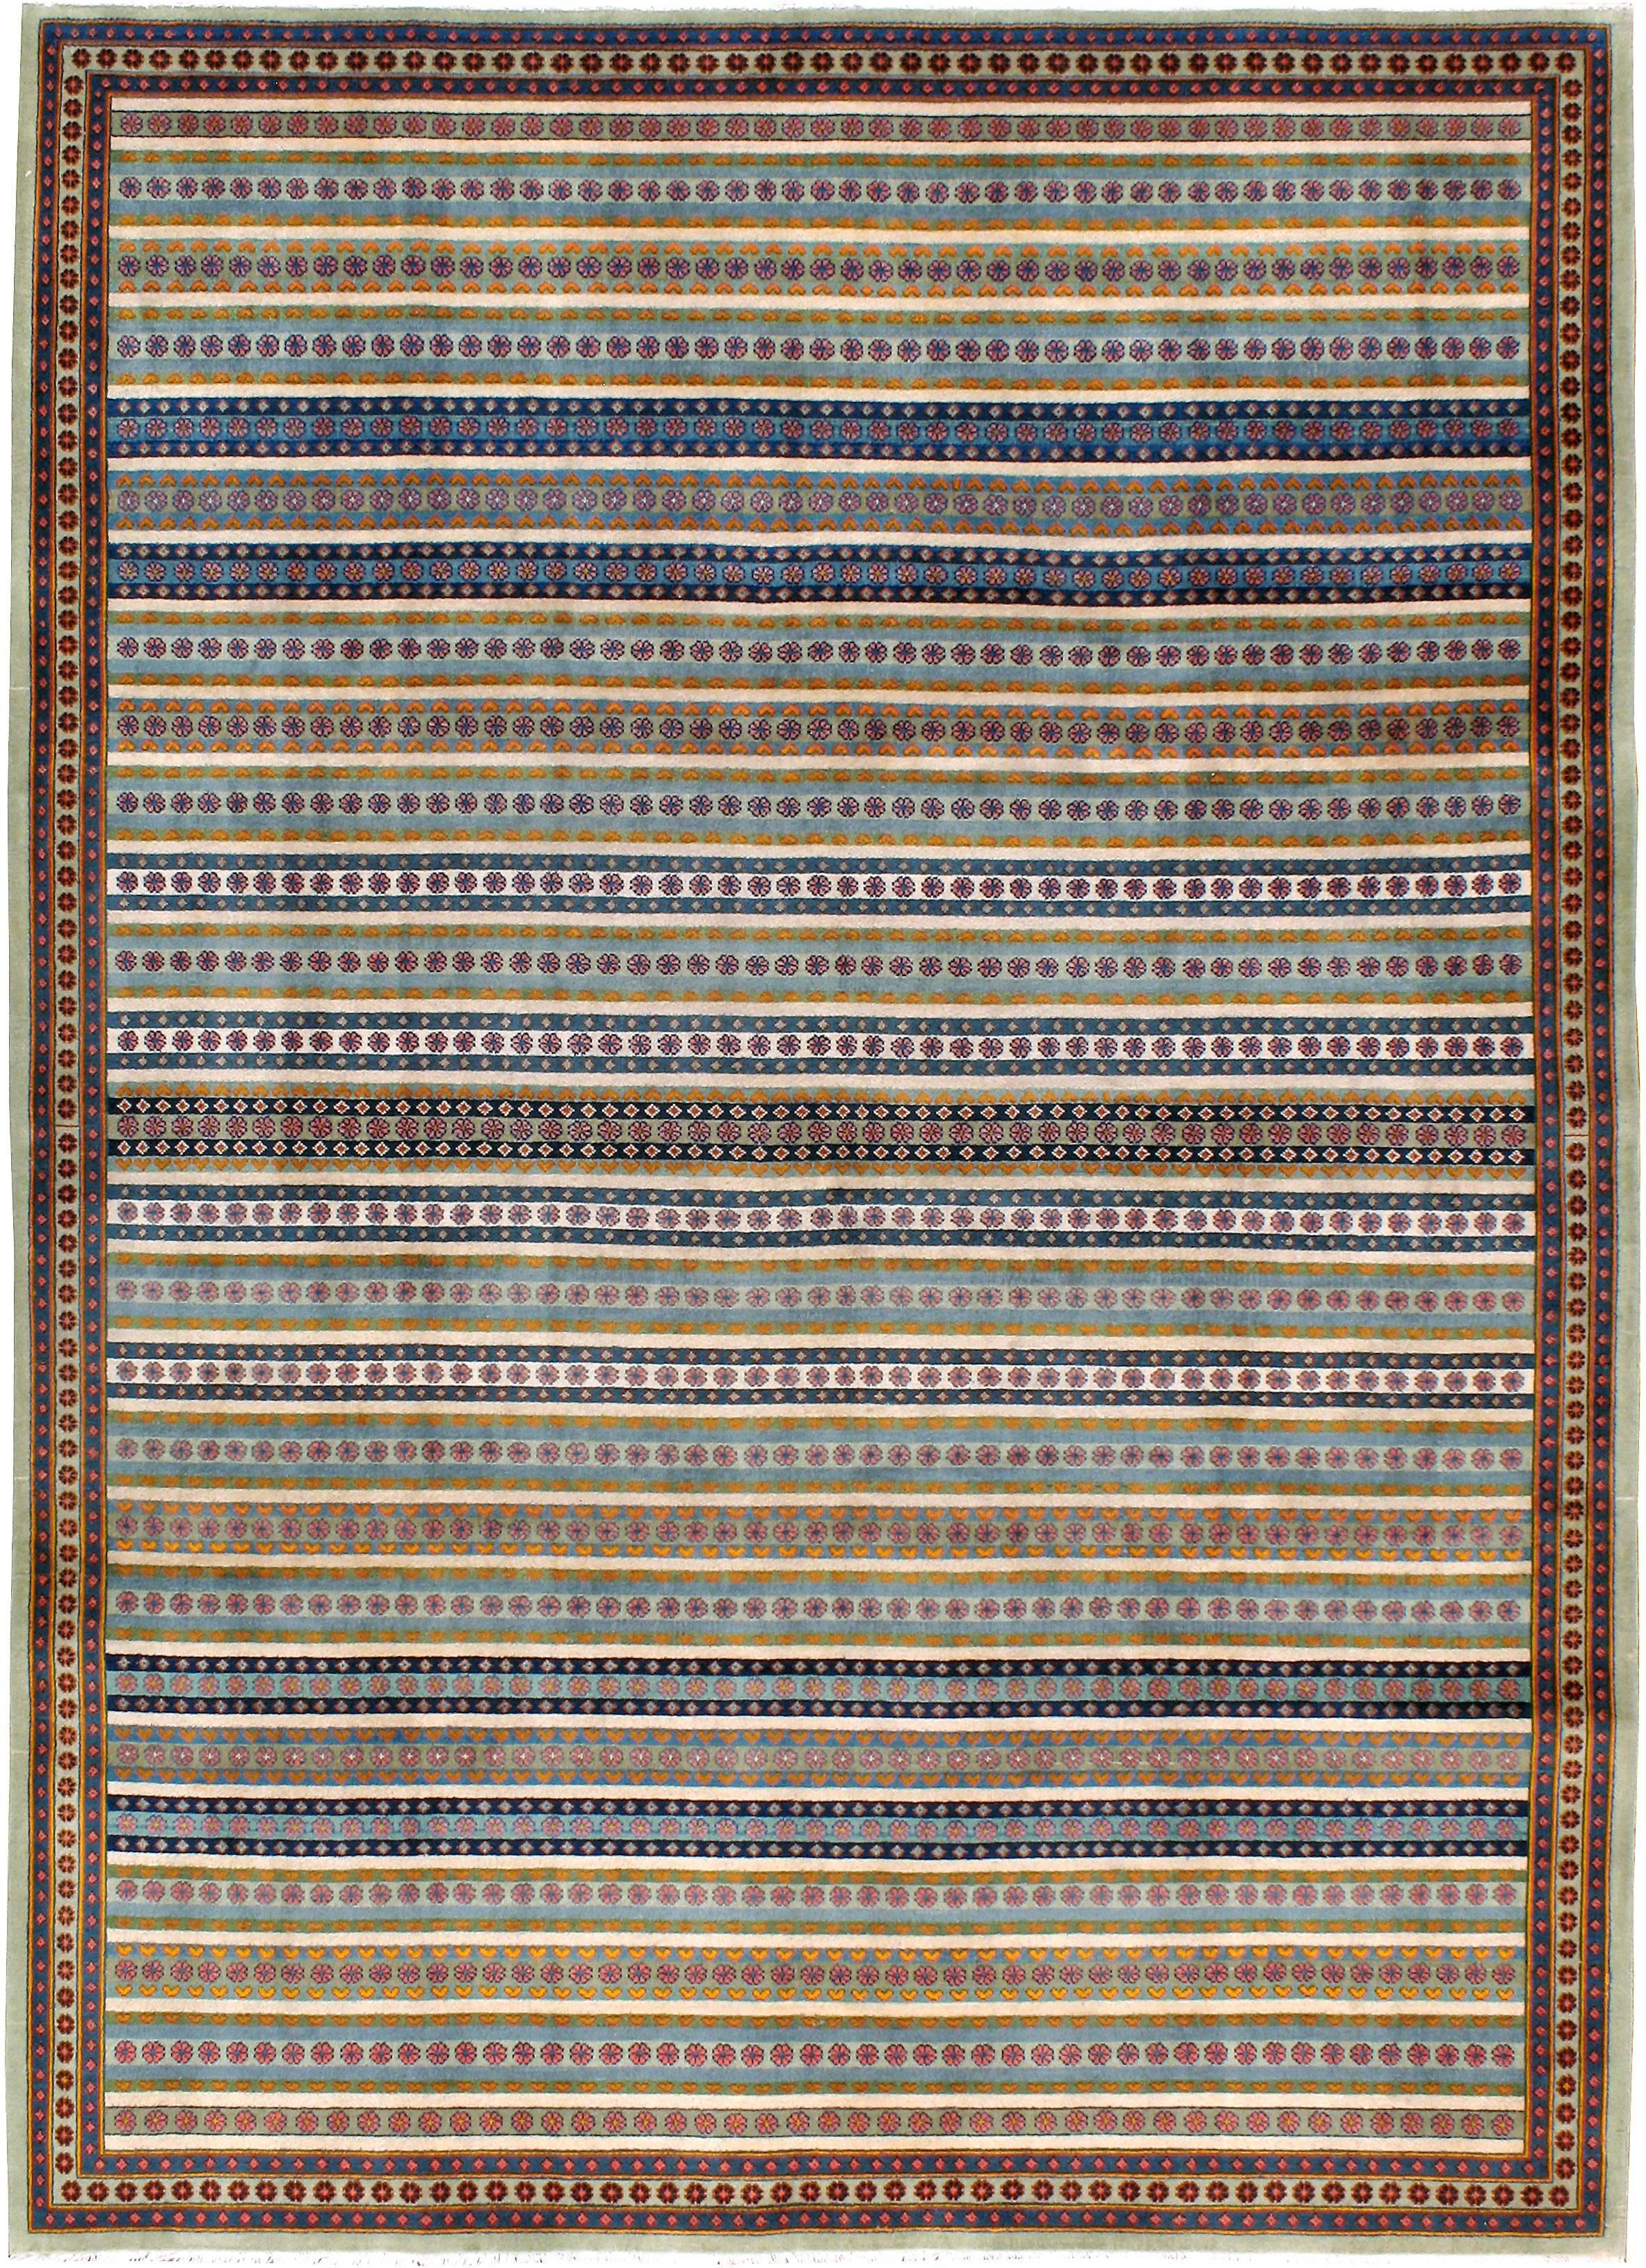 A vintage Persian Kashan carpet from the mid-20th century with a modernist design.